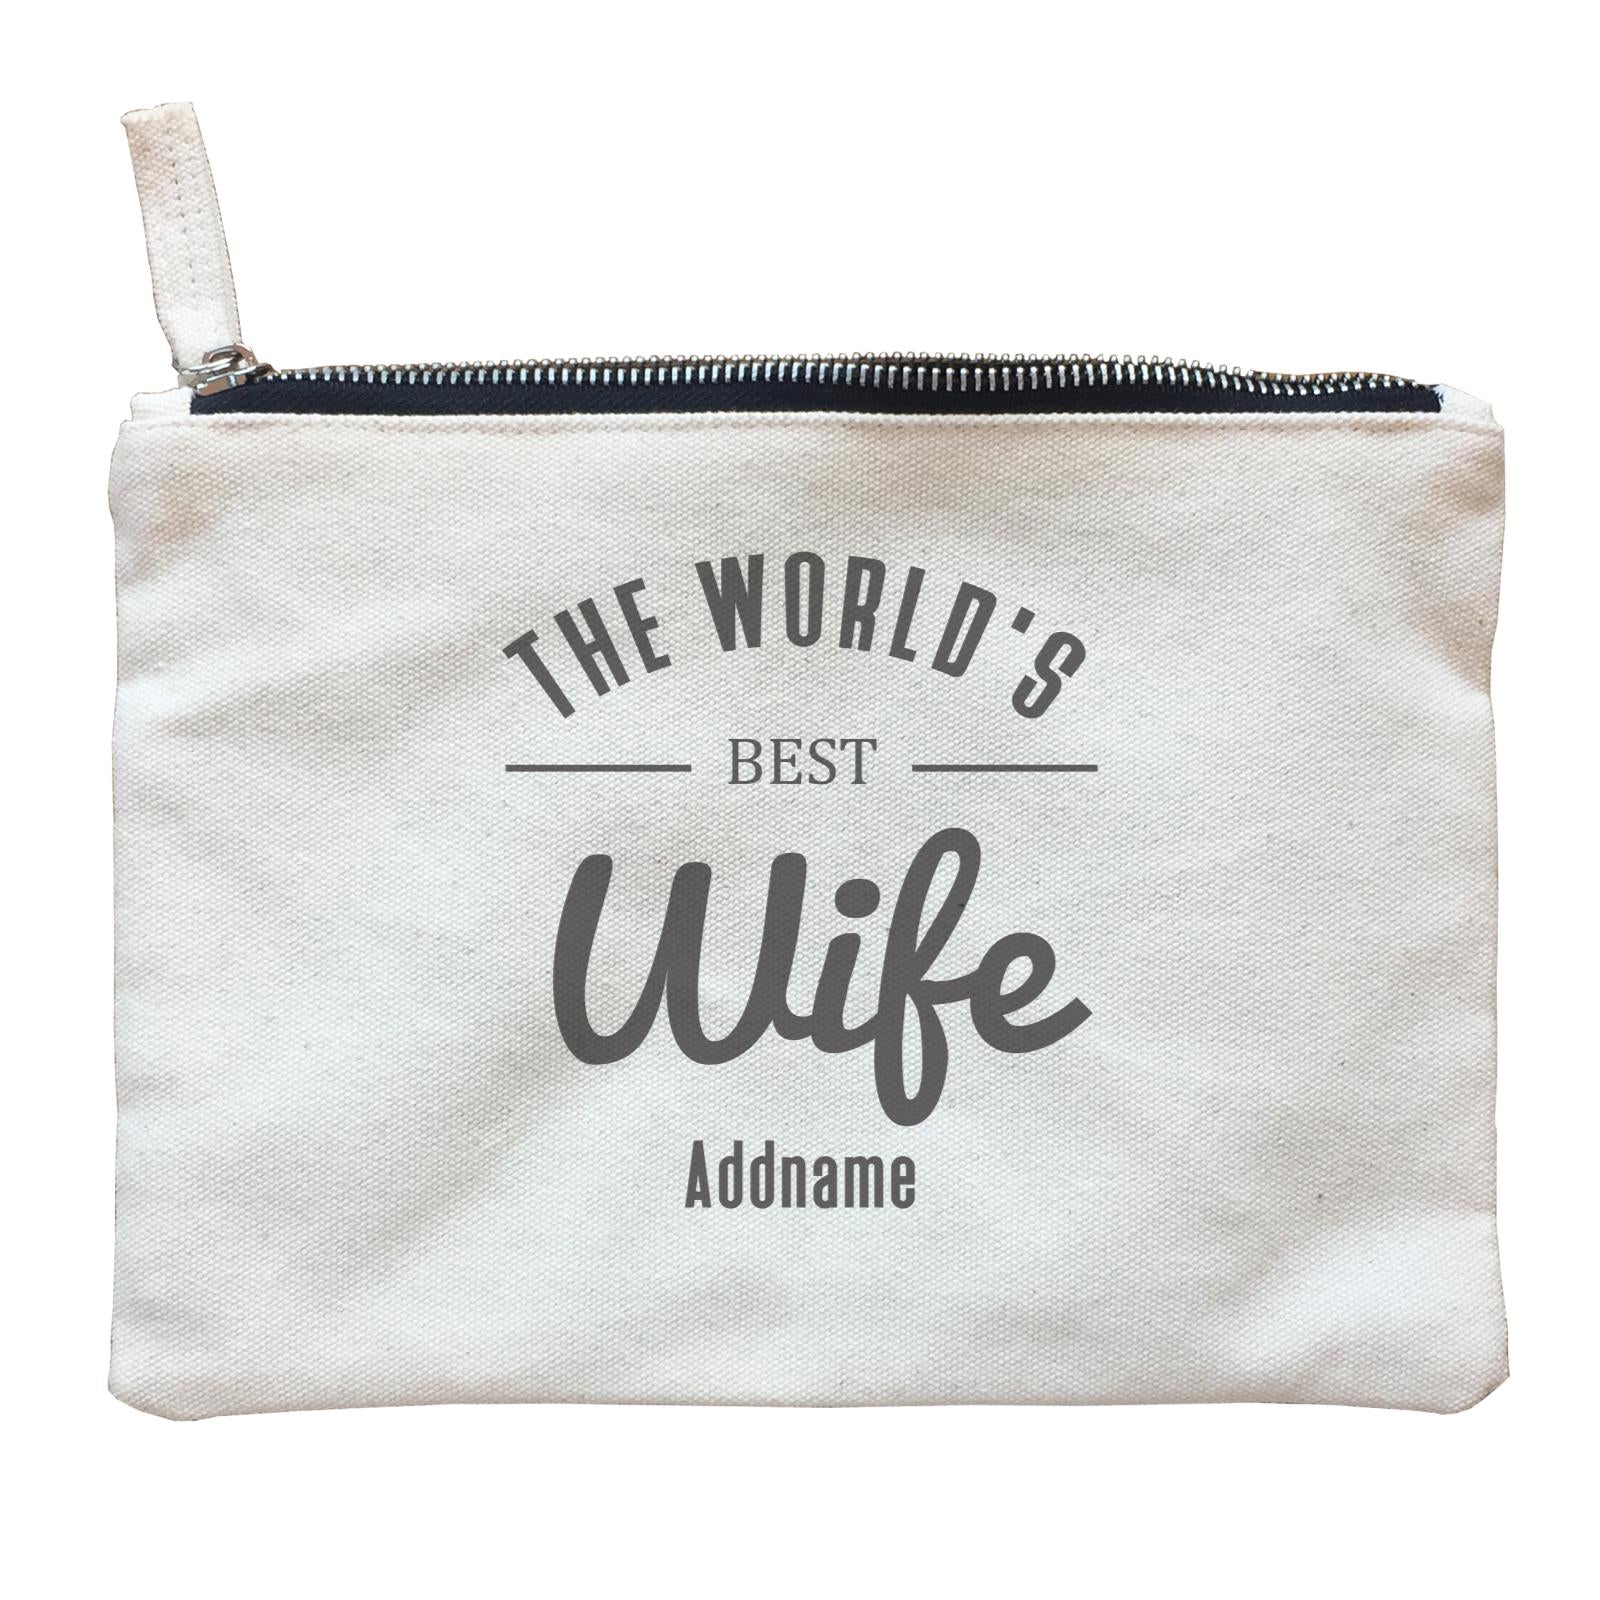 Husband and Wife The World's Best Wife Addname Zipper Pouch